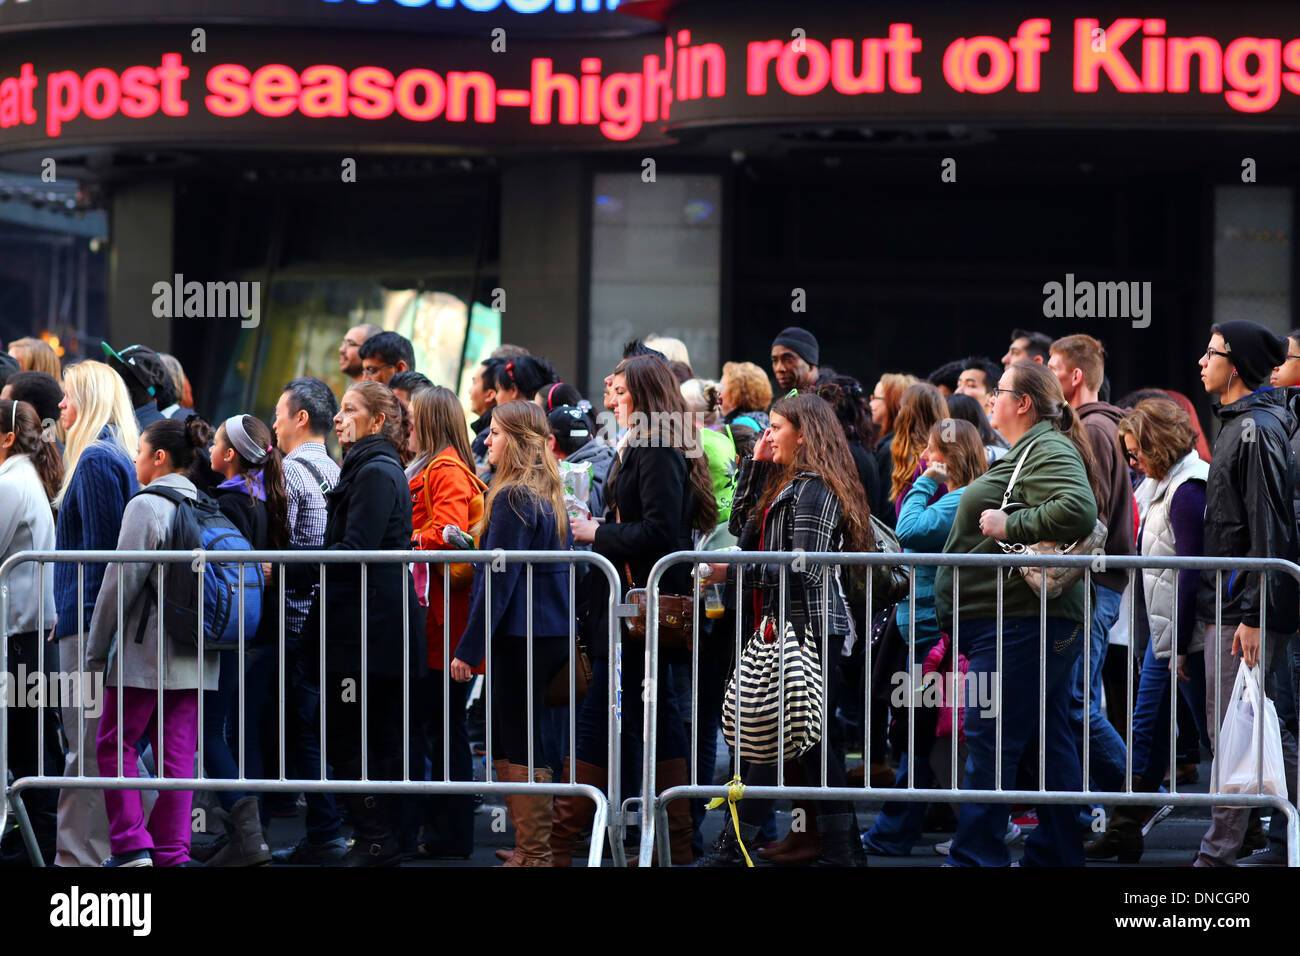 A large crowd of people walking along a barricaded, crowded sidewalk in Times Square with a news ticker marquee above Stock Photo